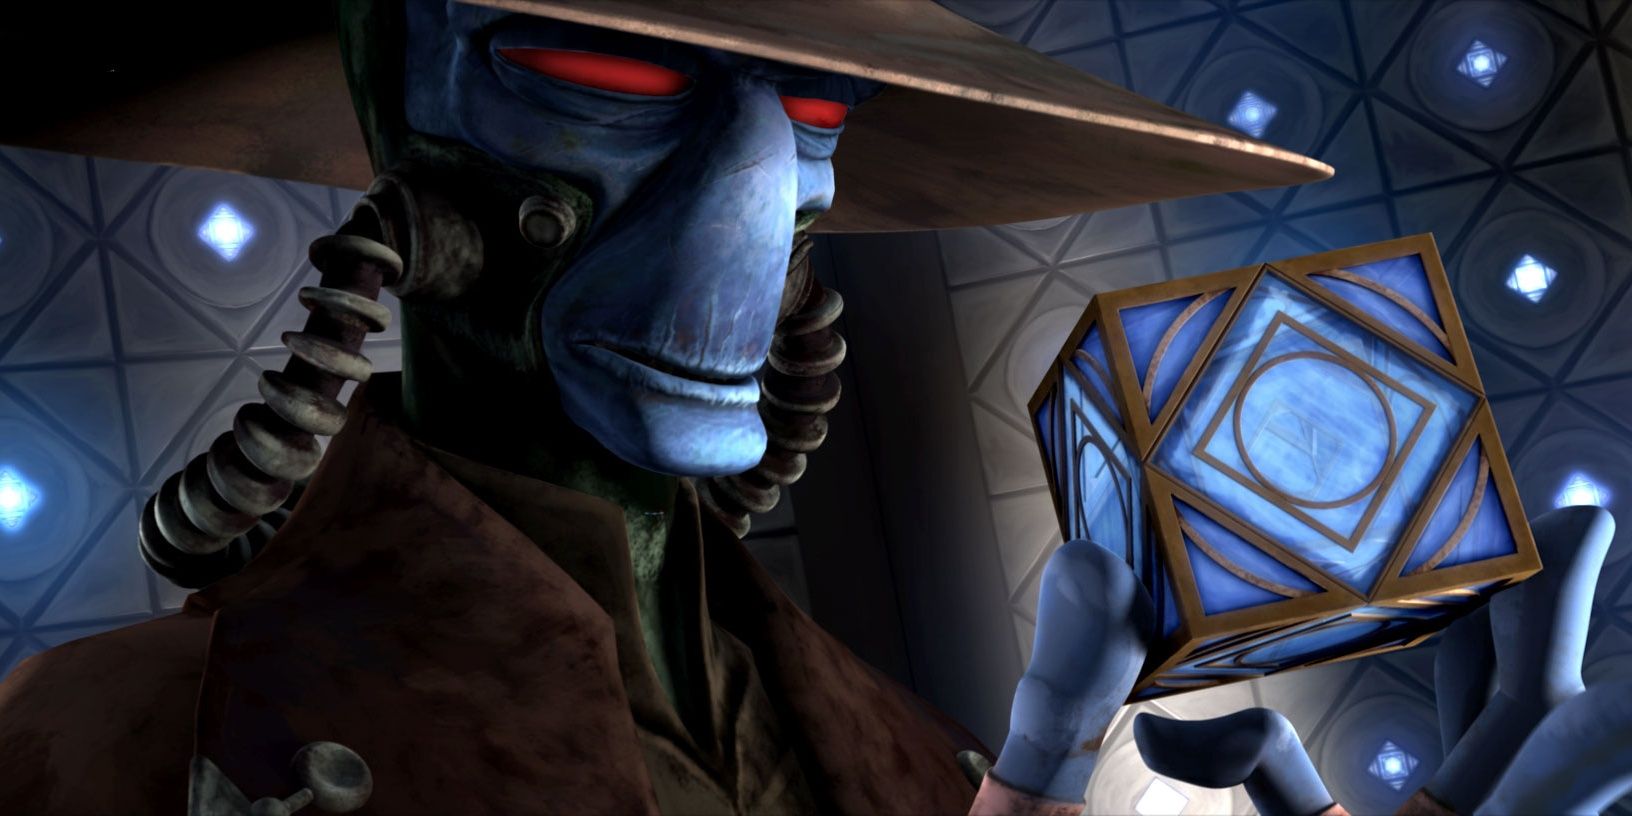 Cad Bane holds the holocron he stole from the Jedi Temple in The Clone Wars